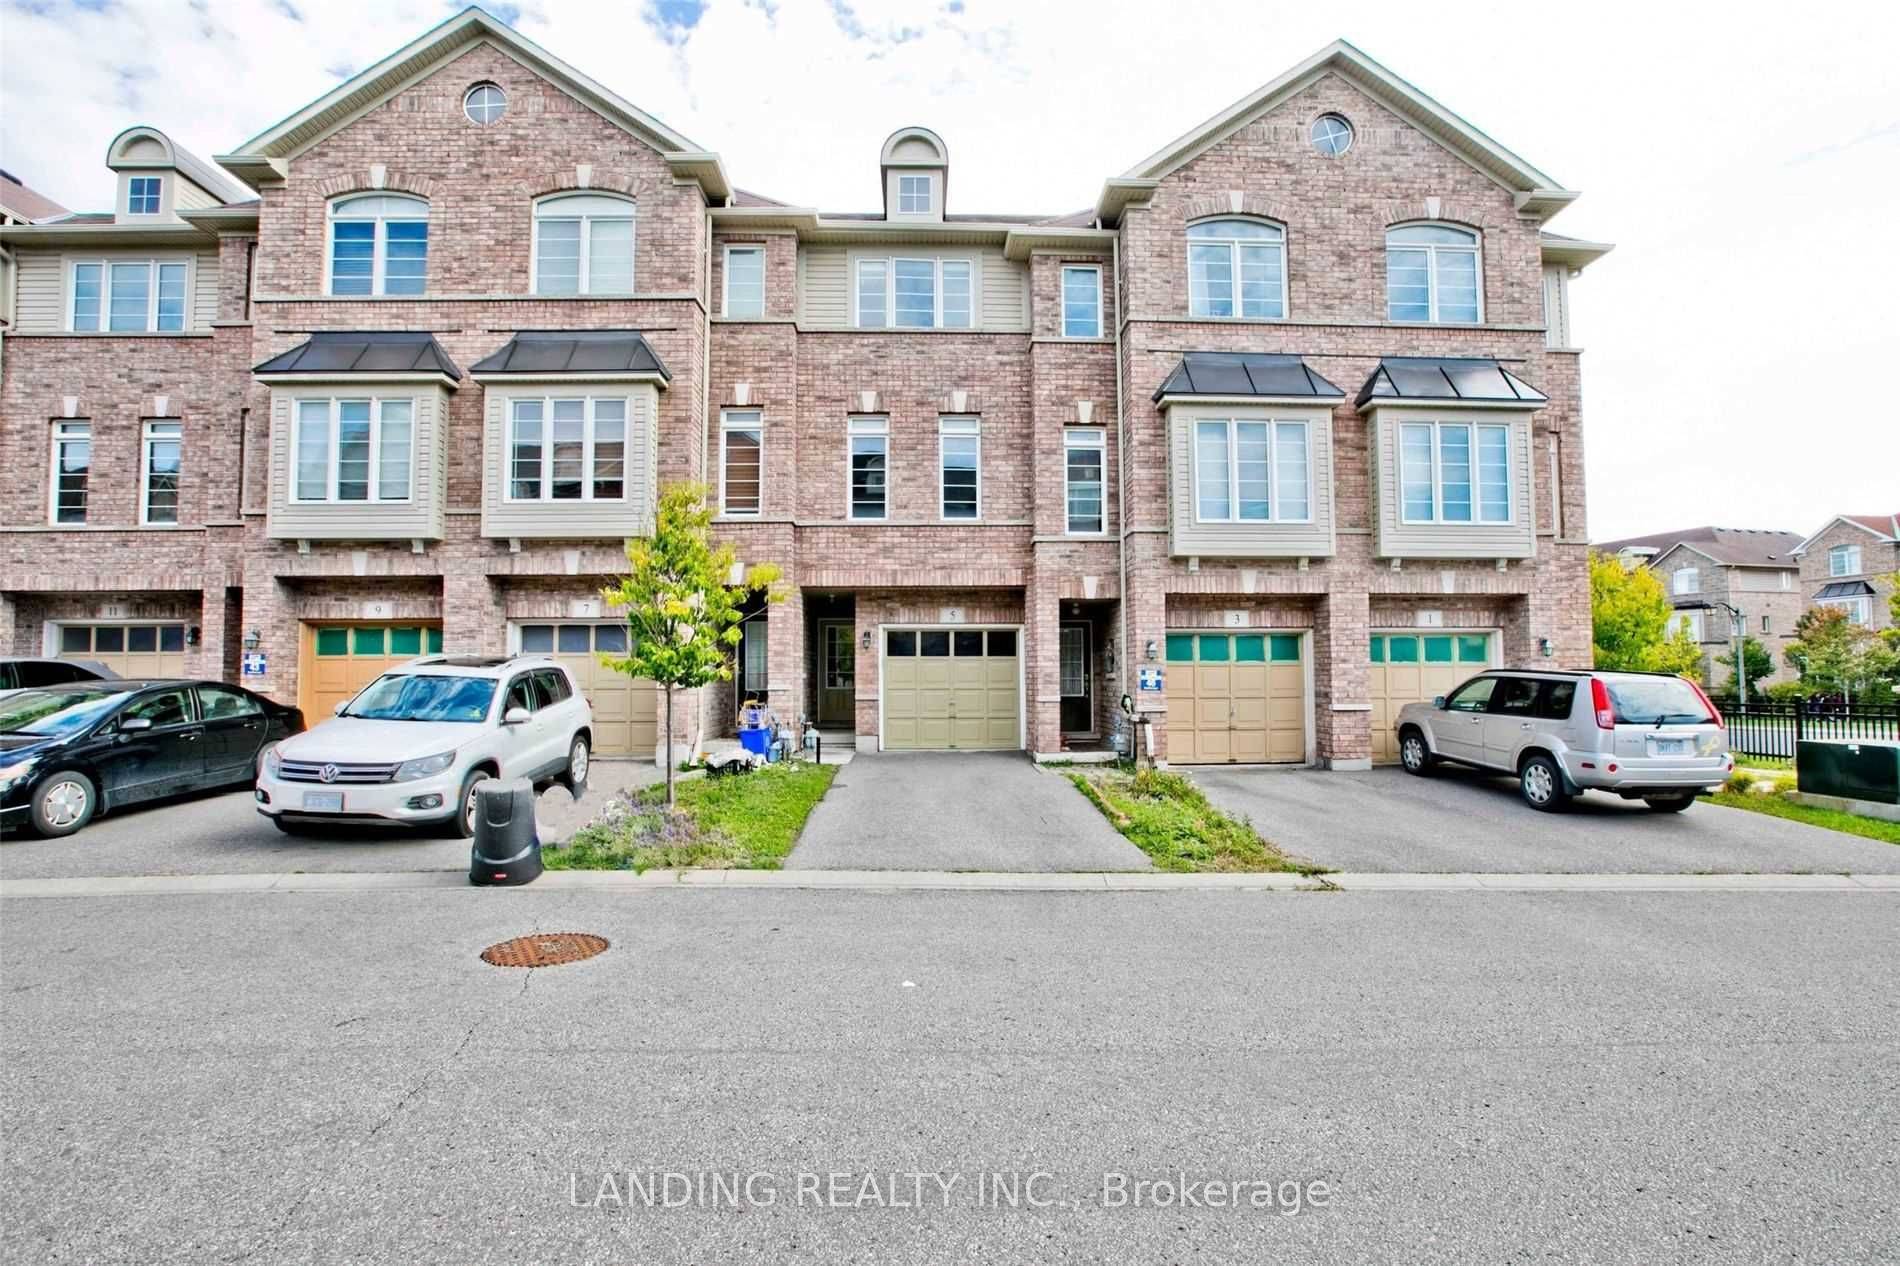 Very Convient locaed at 16th and Mccowan in the heart of Markham Spacious bright functional and pratical layout hardwood floor 3 bedrooms with 2.